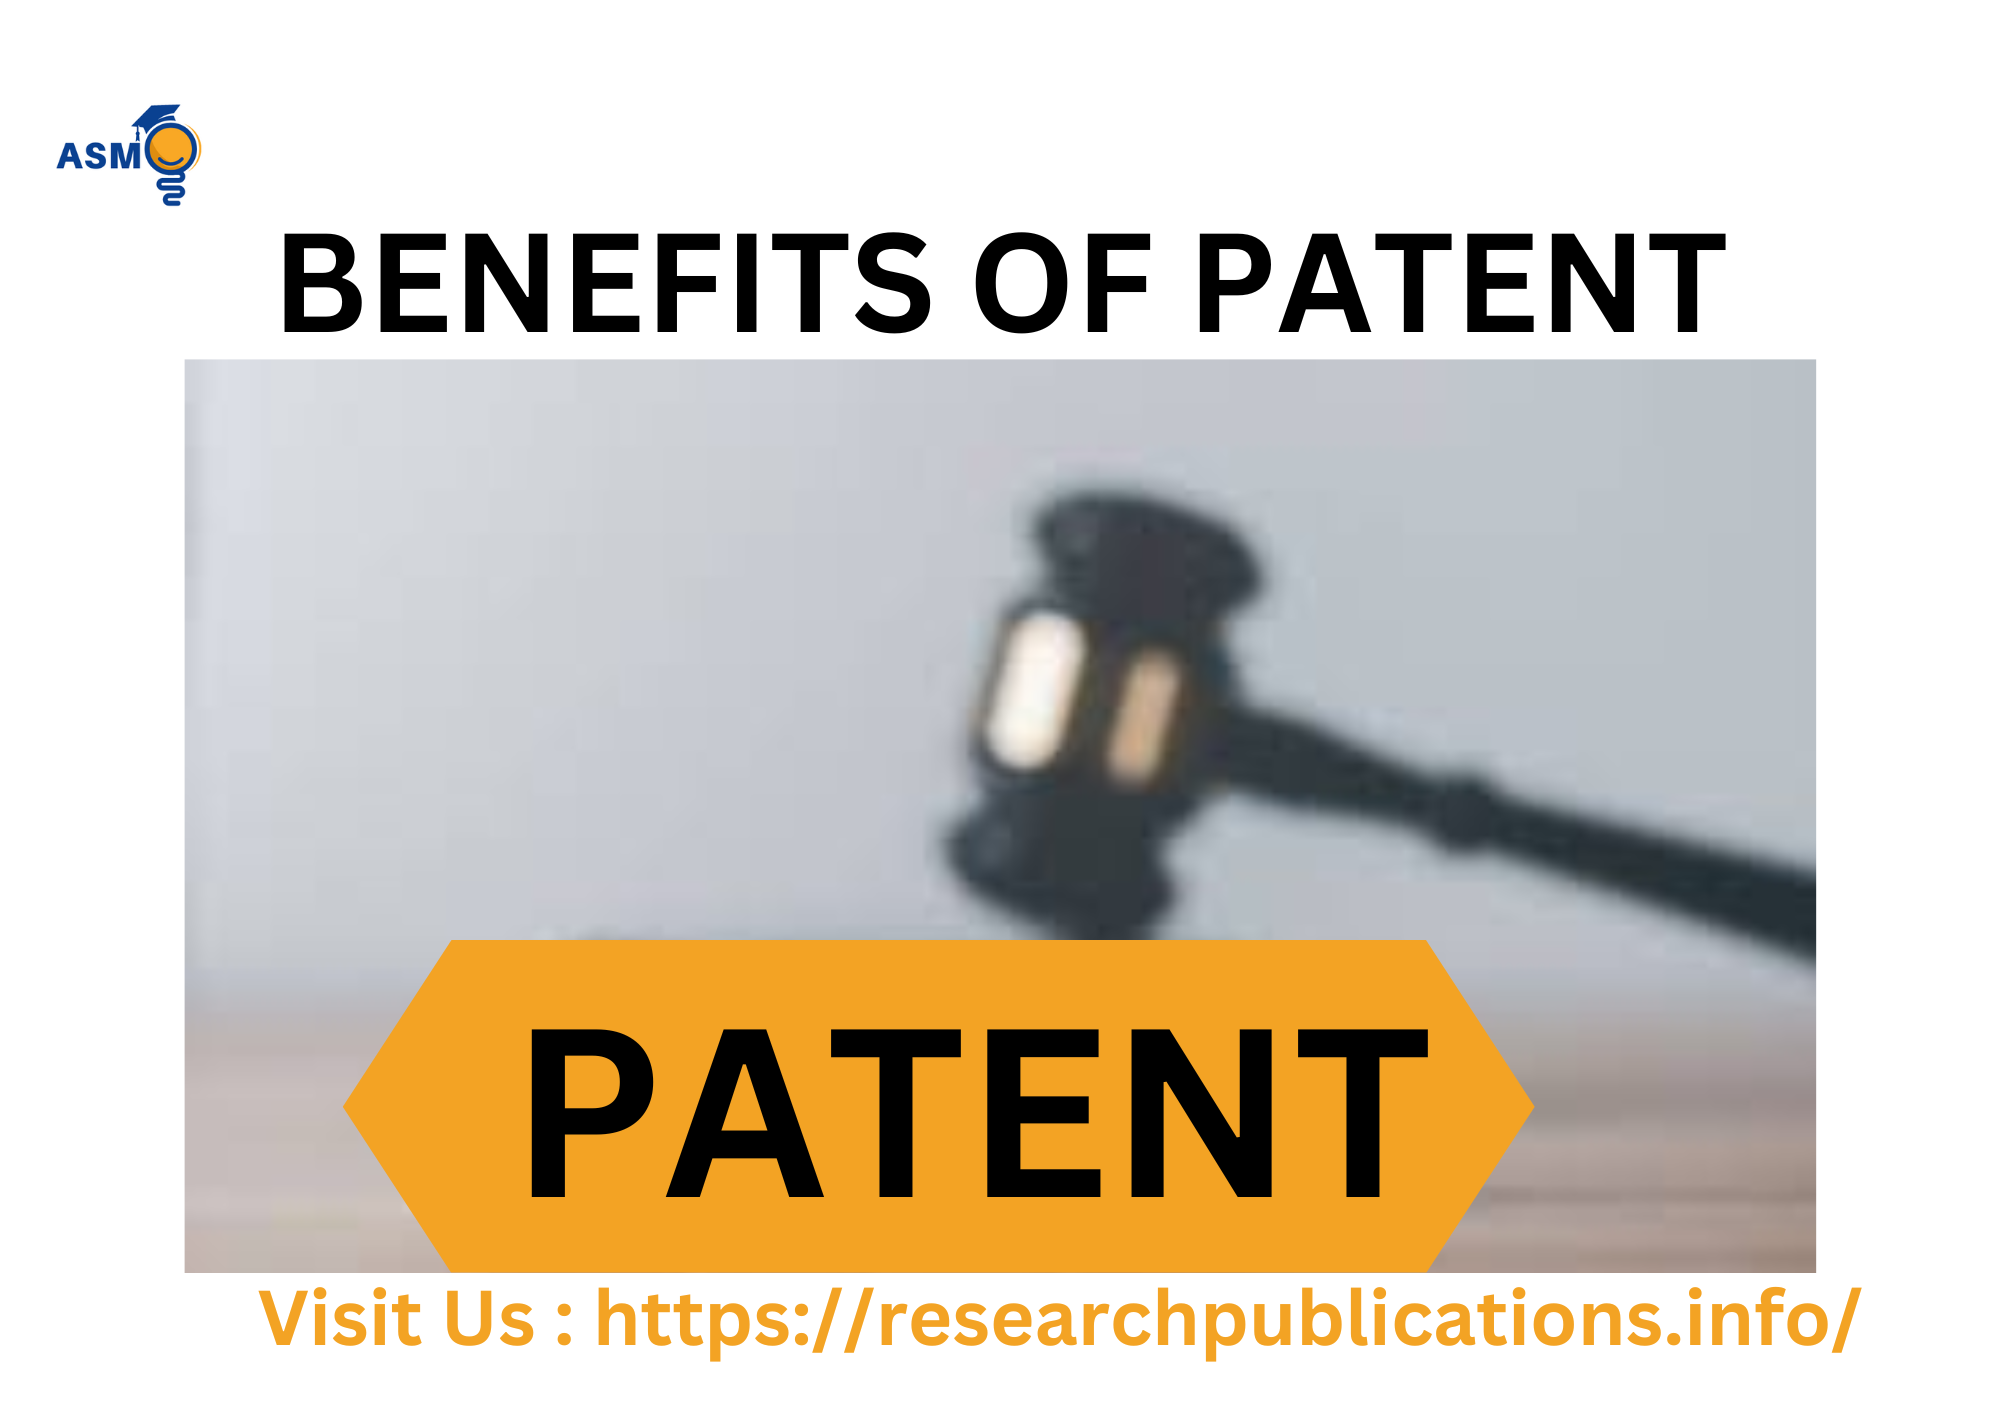 Patent higher education Benefits of Patent, how to apply patent